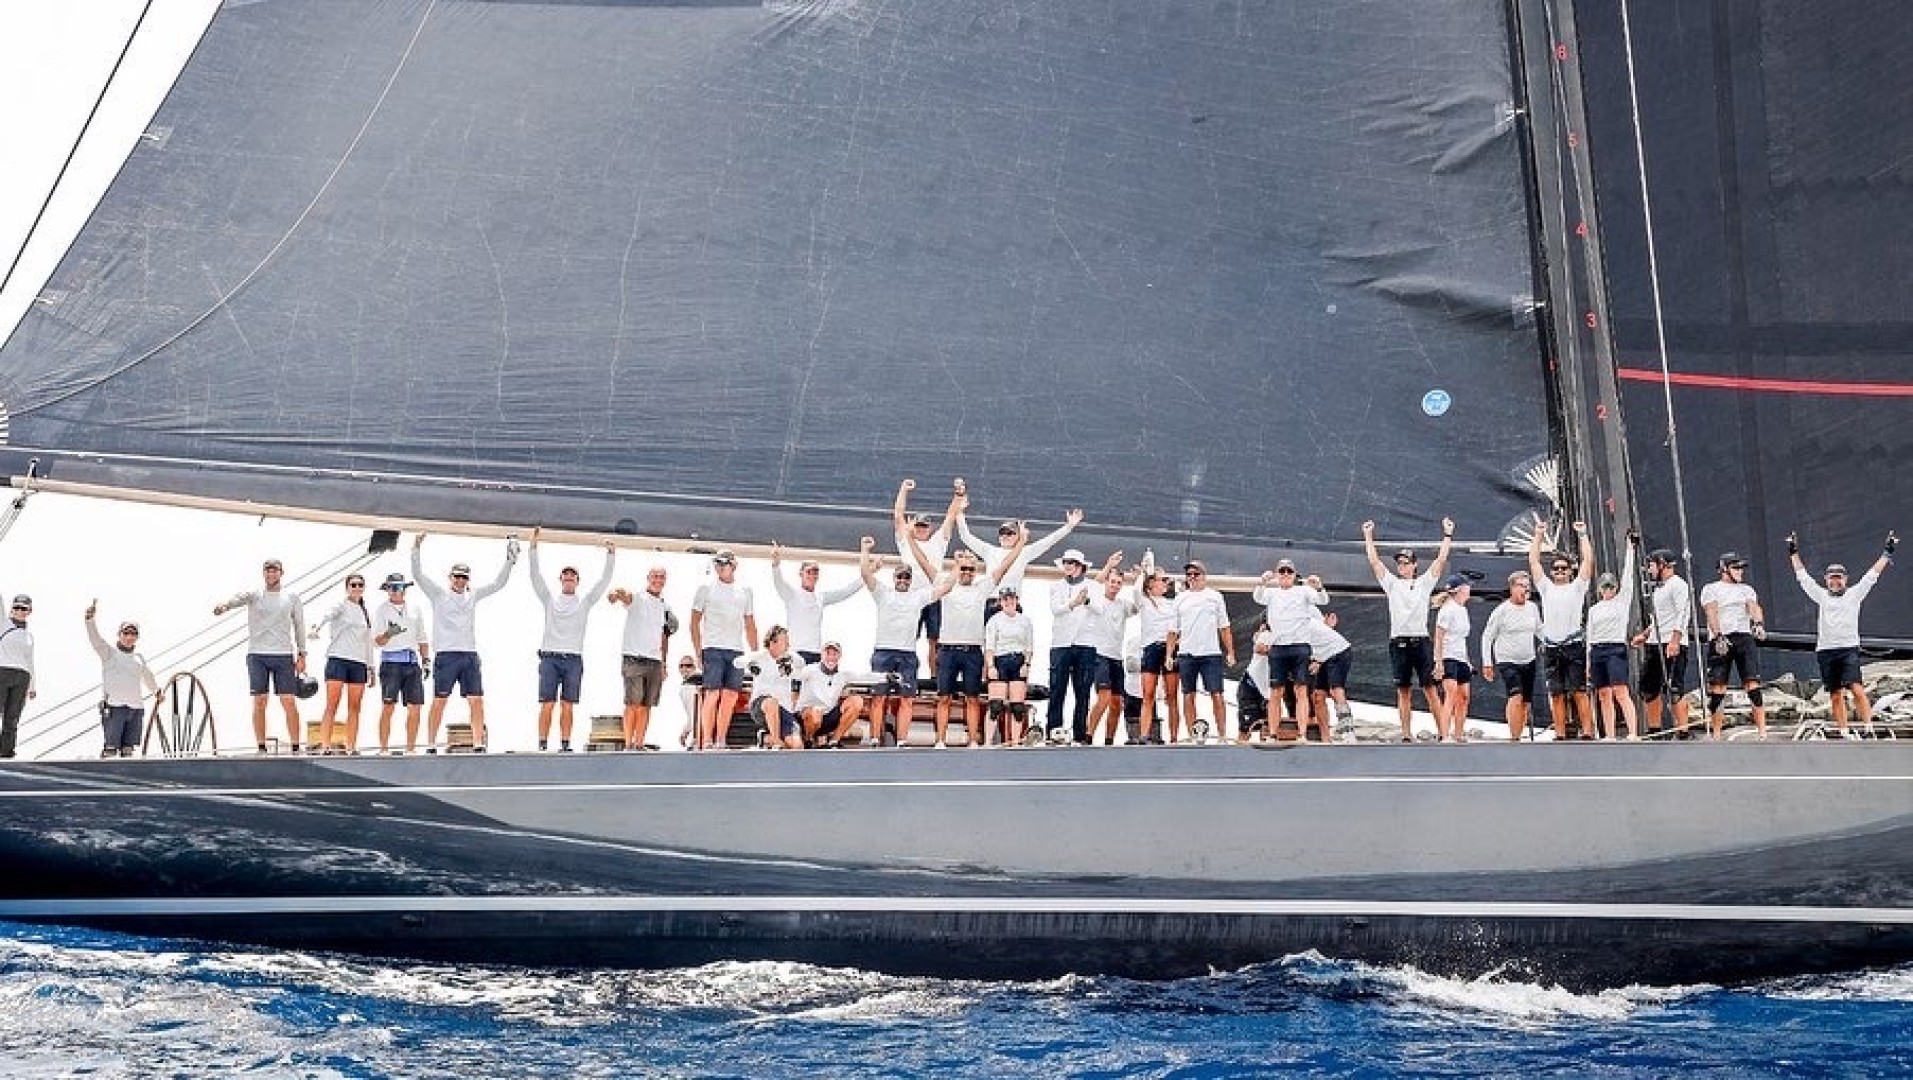 Svea win the Superyacht Cup Palma. Photo Credit: Sailing Energy/The Superyacht Cup